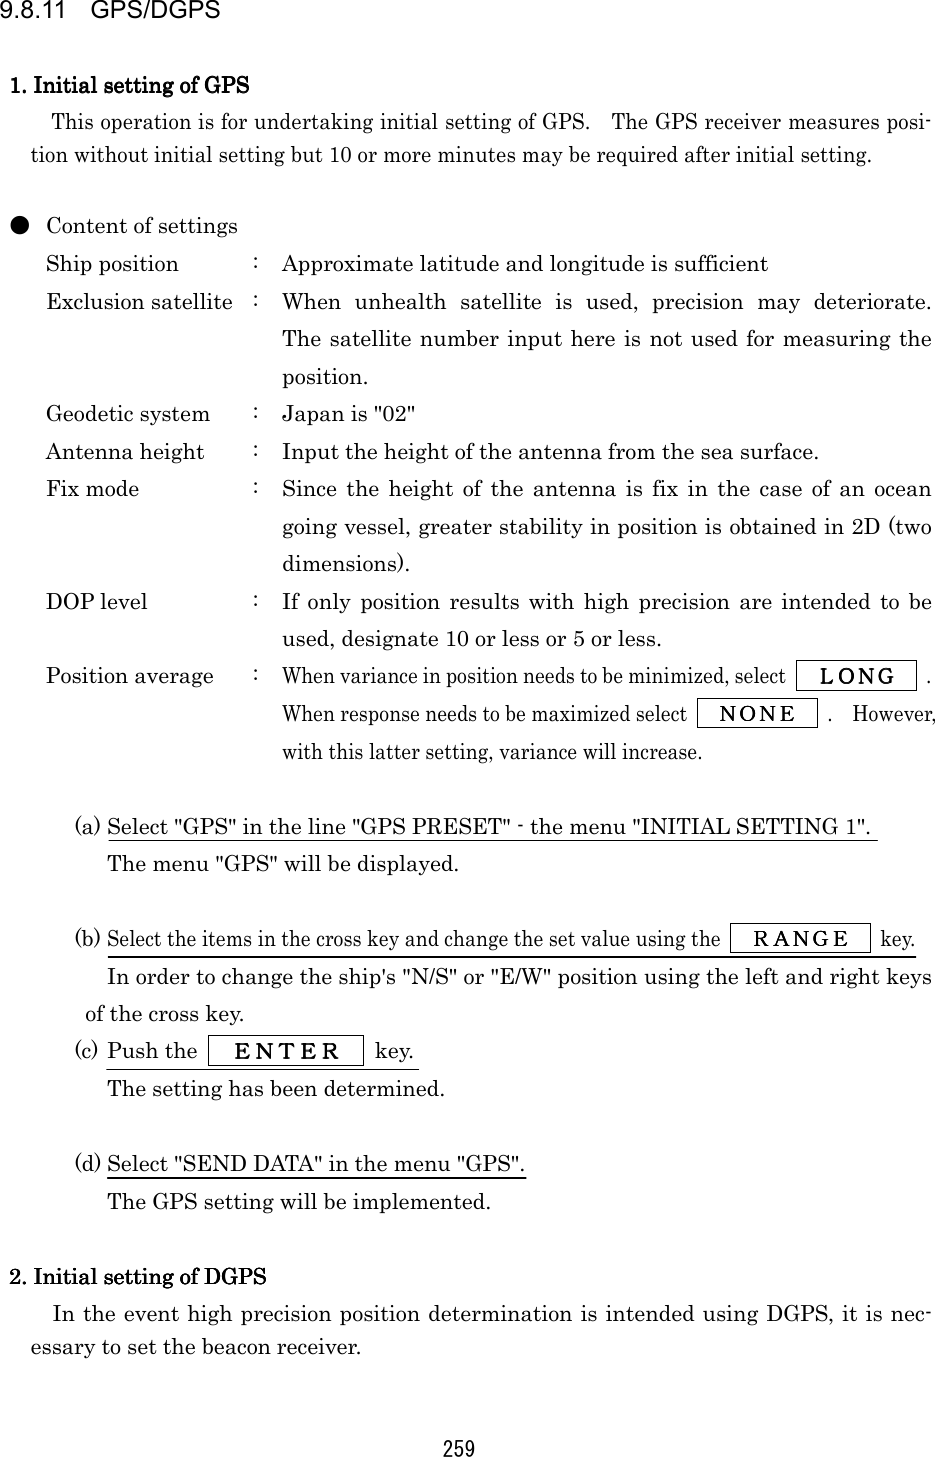 259 9.8.11 GPS/DGPS  1. Initial setting of GPS1. Initial setting of GPS1. Initial setting of GPS1. Initial setting of GPS    This operation is for undertaking initial setting of GPS.    The GPS receiver measures posi-tion without initial setting but 10 or more minutes may be required after initial setting.  ●  Content of settings Ship position  :  Approximate latitude and longitude is sufficient Exclusion satellite  :  When unhealth satellite is used, precision may deteriorate.  The satellite number input here is not used for measuring the position. Geodetic system  :  Japan is &quot;02&quot; Antenna height  :  Input the height of the antenna from the sea surface. Fix mode  :  Since the height of the antenna is fix in the case of an ocean going vessel, greater stability in position is obtained in 2D (two dimensions). DOP level  :  If only position results with high precision are intended to be used, designate 10 or less or 5 or less. Position average  : When variance in position needs to be minimized, select     ＬＯＮＧＬＯＮＧＬＯＮＧＬＯＮＧ     .  When response needs to be maximized select     ＮＯＮＥＮＯＮＥＮＯＮＥＮＯＮＥ     .  However, with this latter setting, variance will increase.  (a) Select &quot;GPS&quot; in the line &quot;GPS PRESET&quot; - the menu &quot;INITIAL SETTING 1&quot;. The menu &quot;GPS&quot; will be displayed.  (b) Select the items in the cross key and change the set value using the     ＲＡＮＧＥＲＡＮＧＥＲＡＮＧＥＲＡＮＧＥ     key. In order to change the ship&apos;s &quot;N/S&quot; or &quot;E/W&quot; position using the left and right keys of the cross key. (c) Push the      ＥＮＴＥＲＥＮＴＥＲＥＮＴＥＲＥＮＴＥＲ     key. The setting has been determined.  (d) Select &quot;SEND DATA&quot; in the menu &quot;GPS&quot;. The GPS setting will be implemented.  2. Initial setting of DGPS2. Initial setting of DGPS2. Initial setting of DGPS2. Initial setting of DGPS    In the event high precision position determination is intended using DGPS, it is nec-essary to set the beacon receiver.  